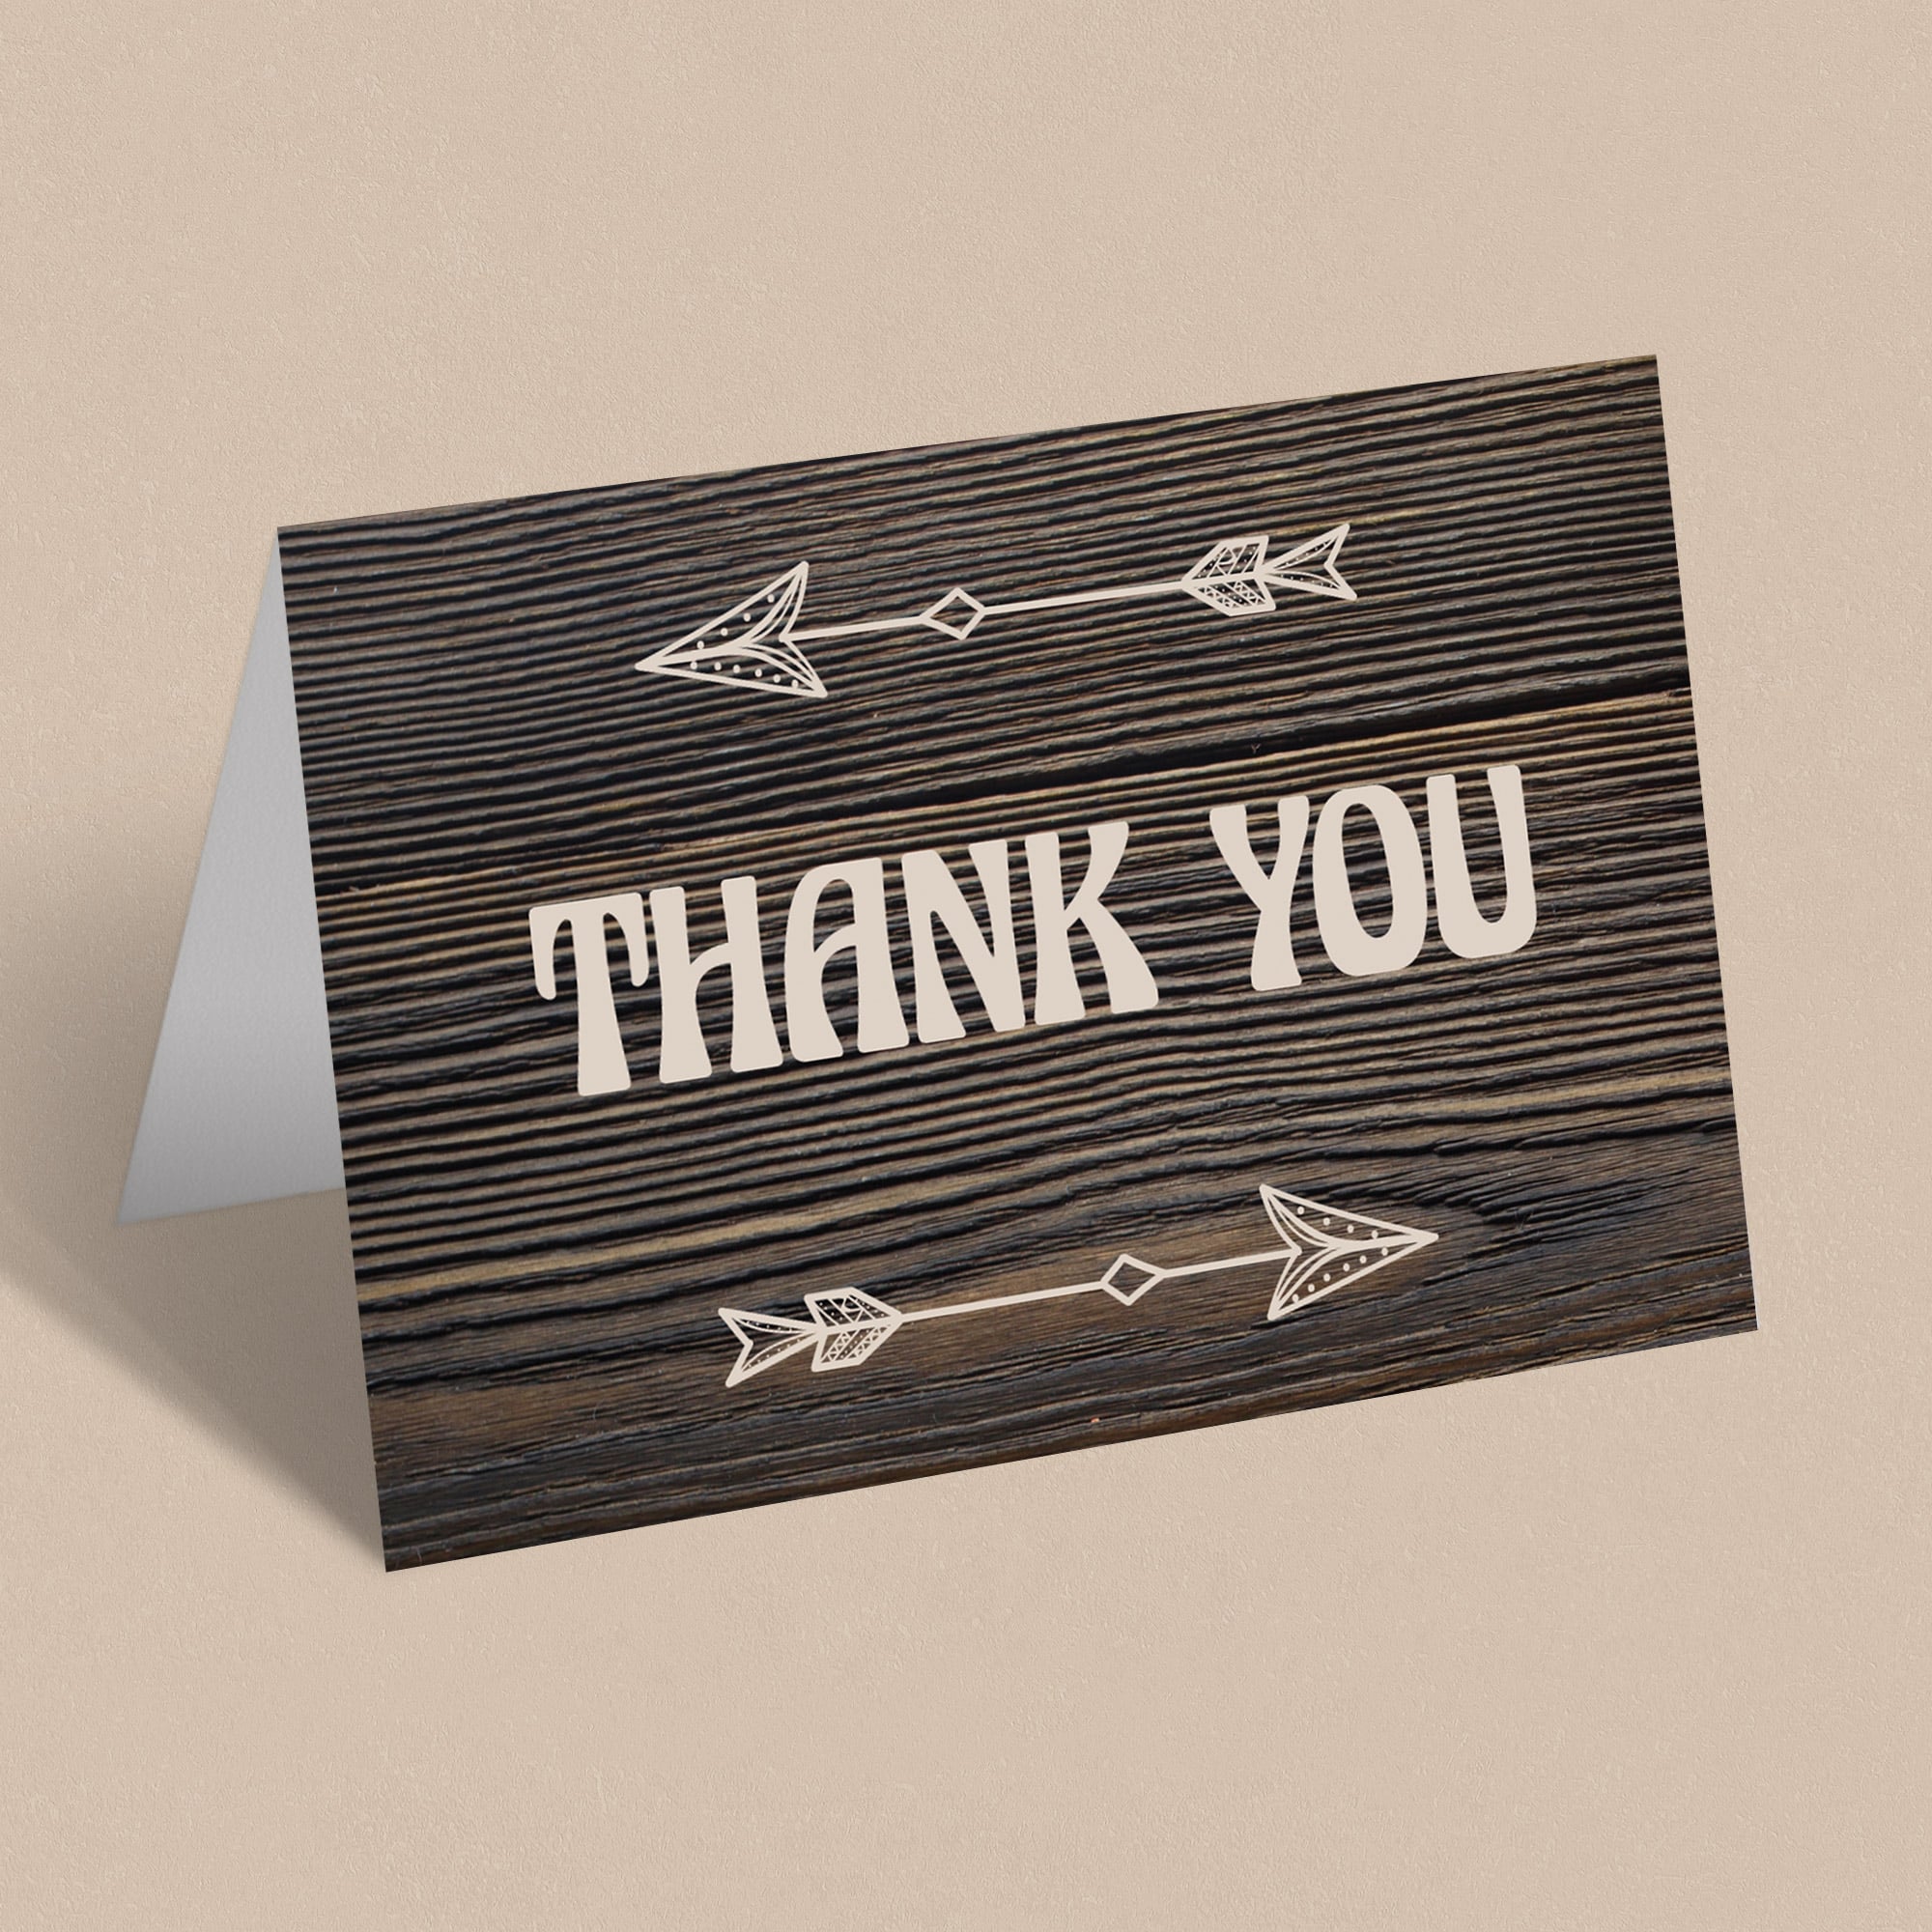 Printable woods thank you card download by LittleSizzle